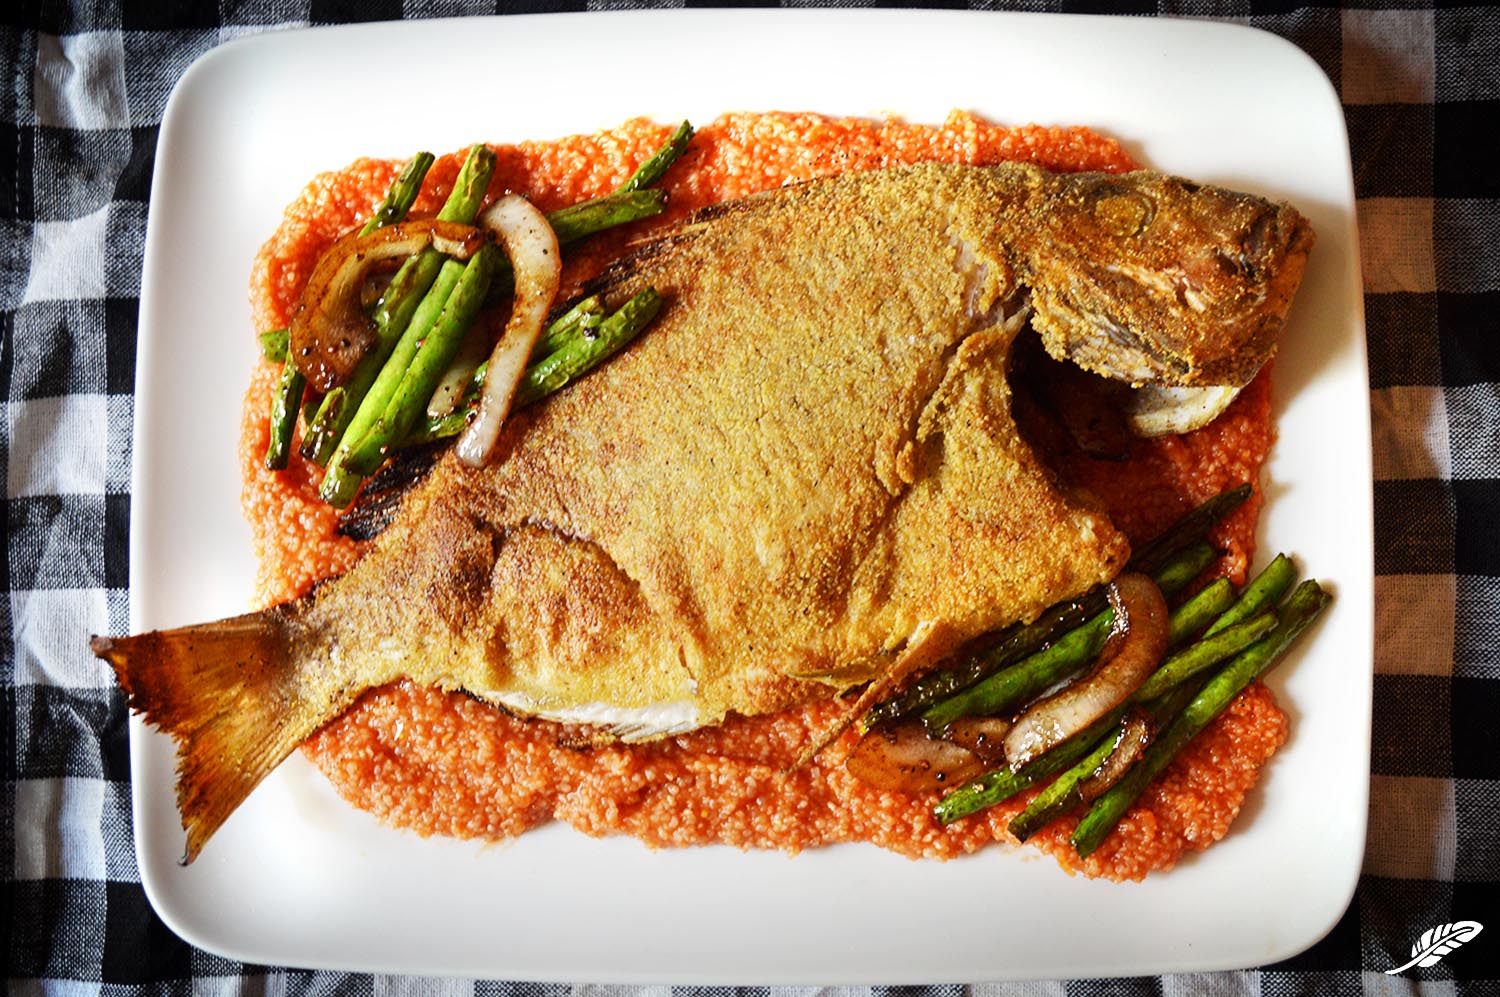 Fried Porgy over "Red" Grits